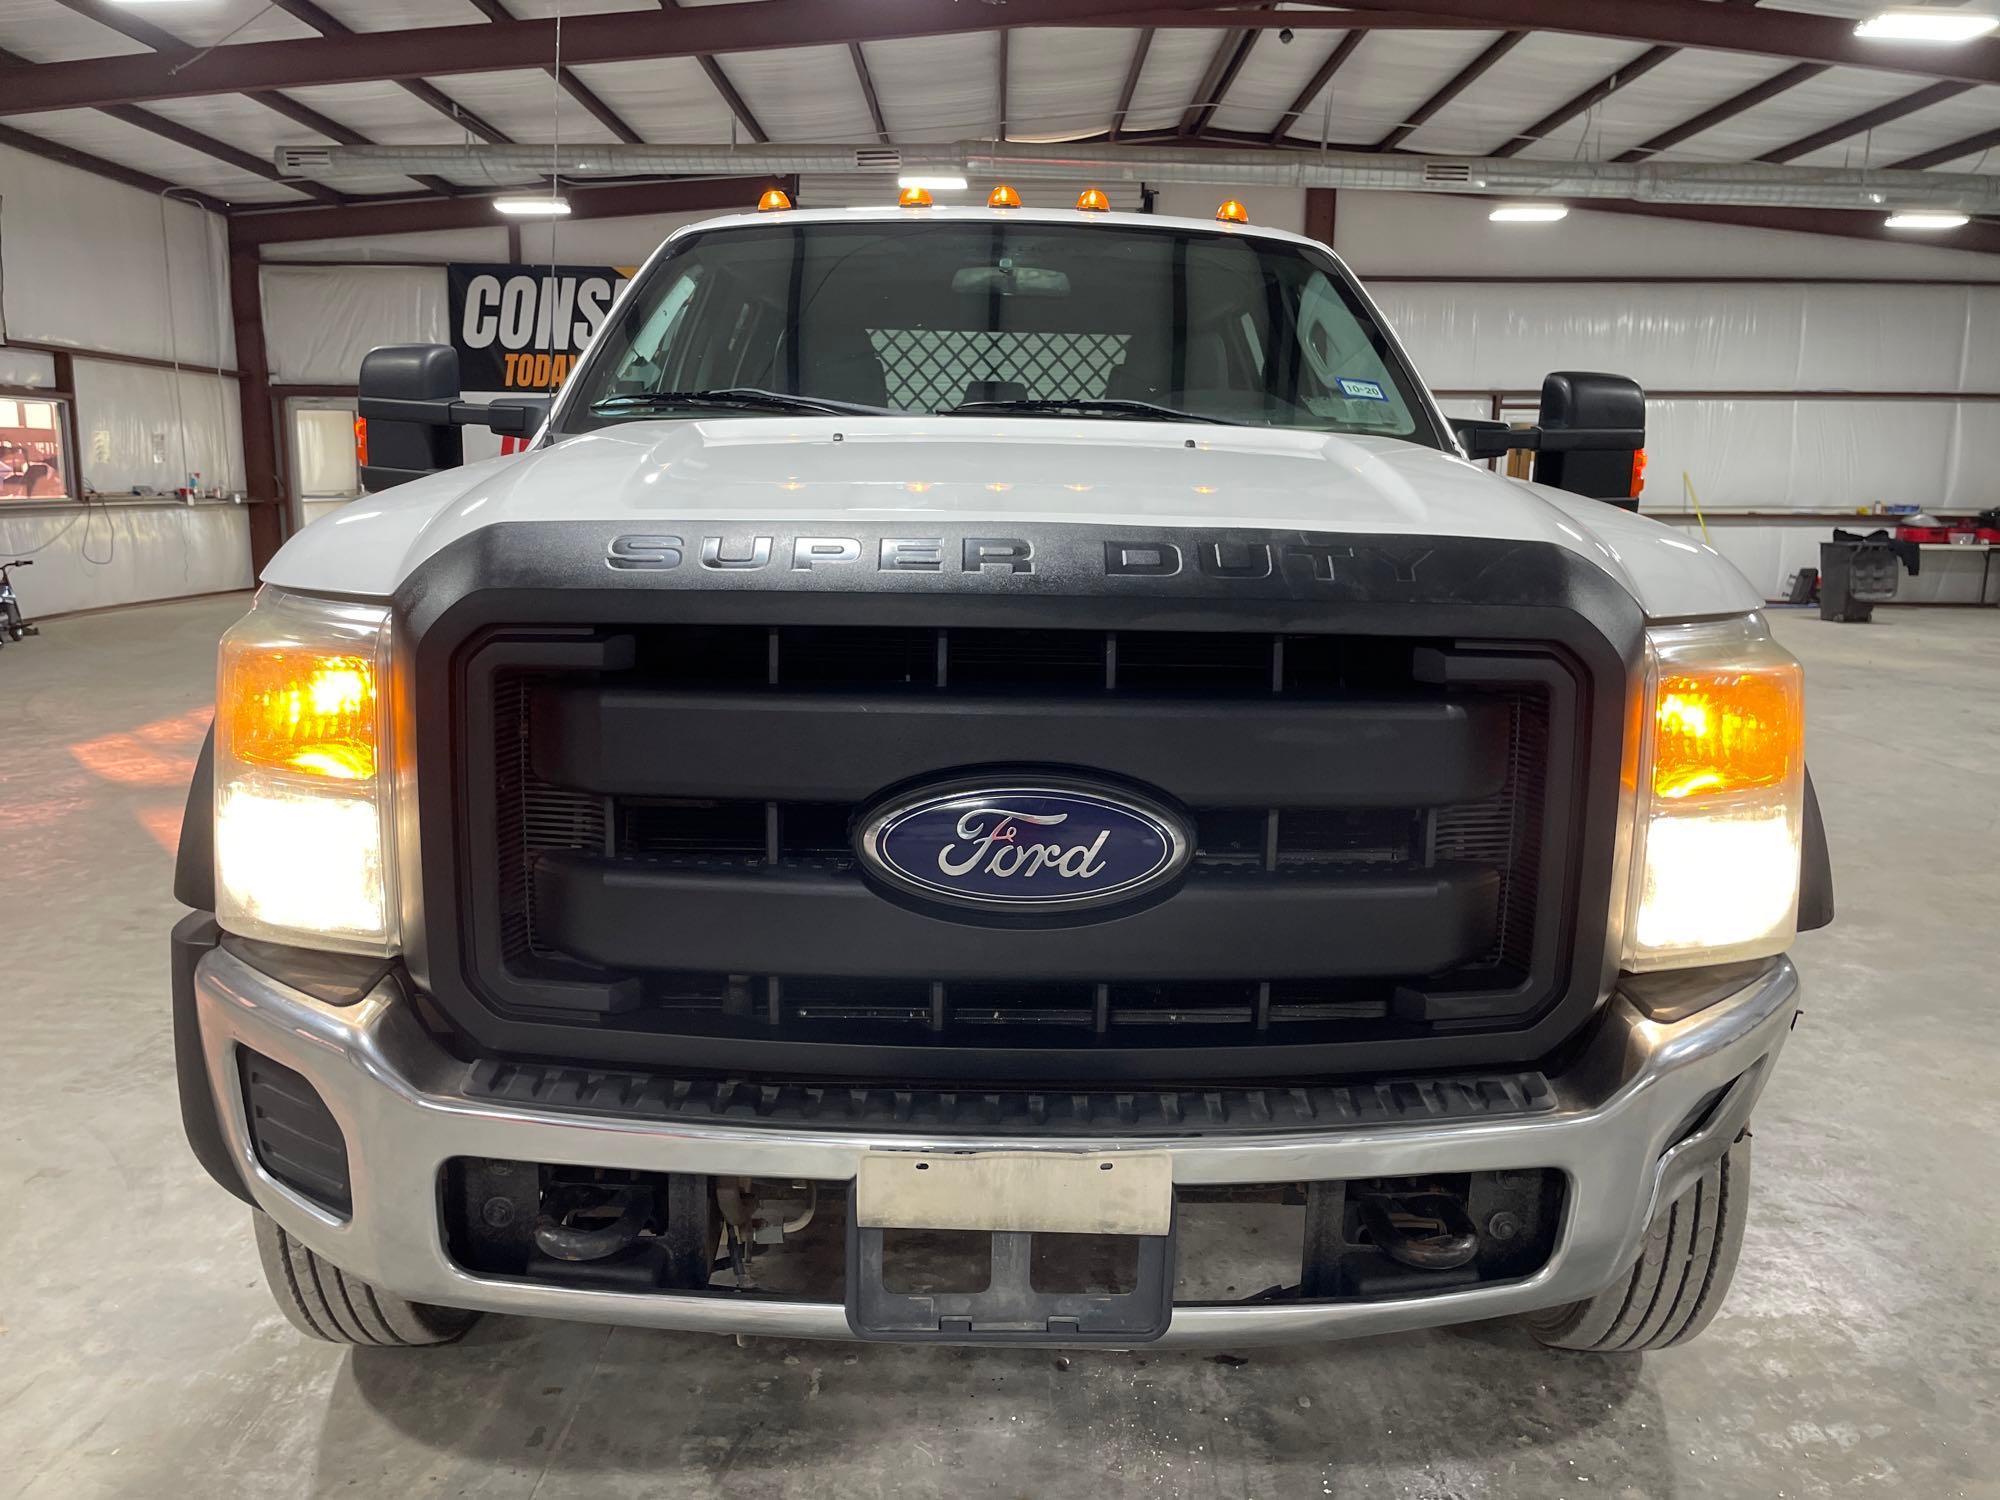 2015 Ford F-450 Flat Bed Truck